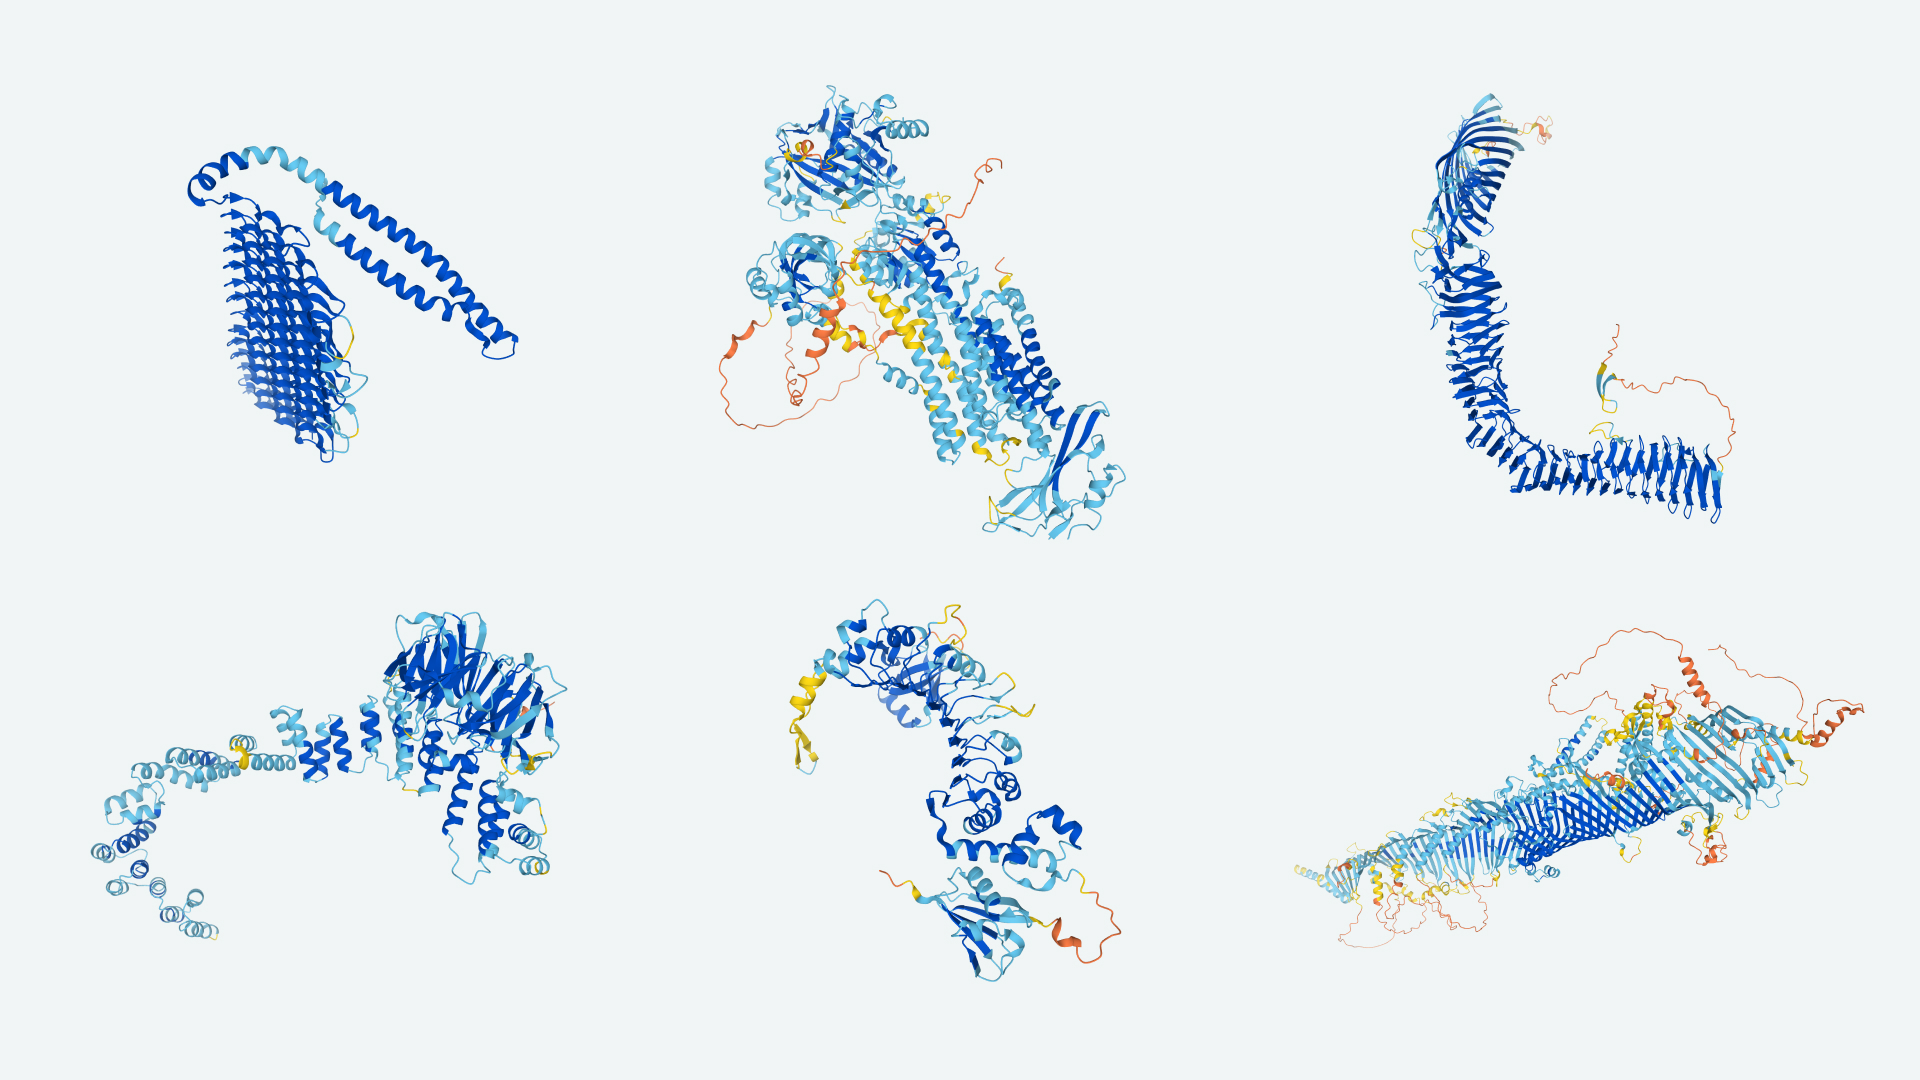 Google identifies millions of mutations in proteins capable of generating diseases |  Science